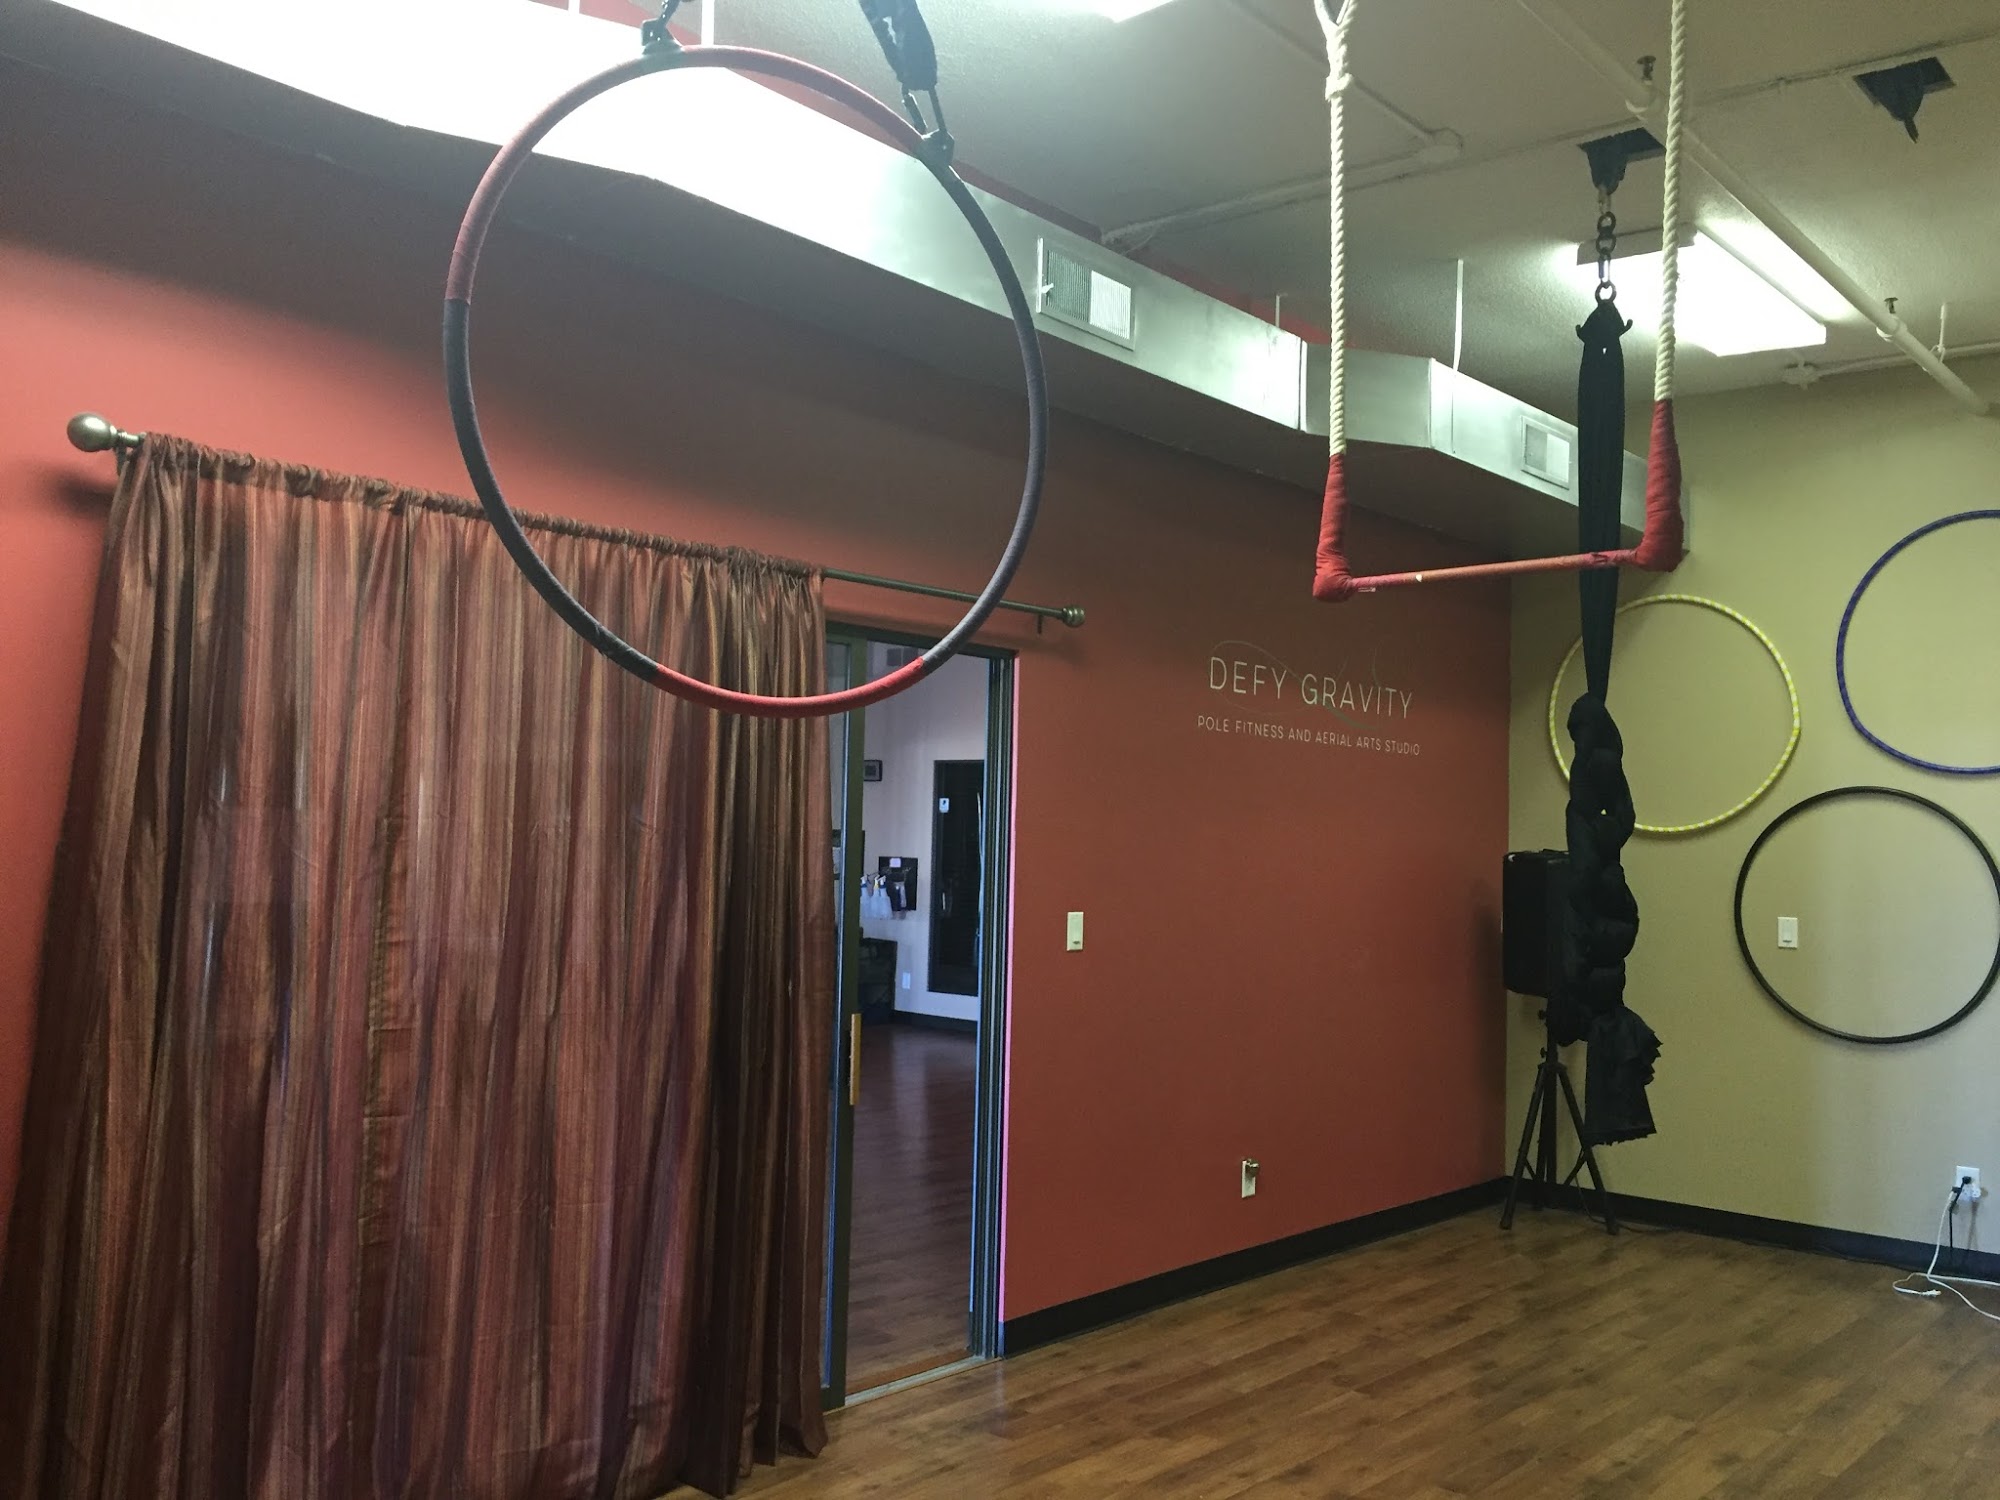 Defy Gravity - Pole Fitness and Aerial Arts Studio